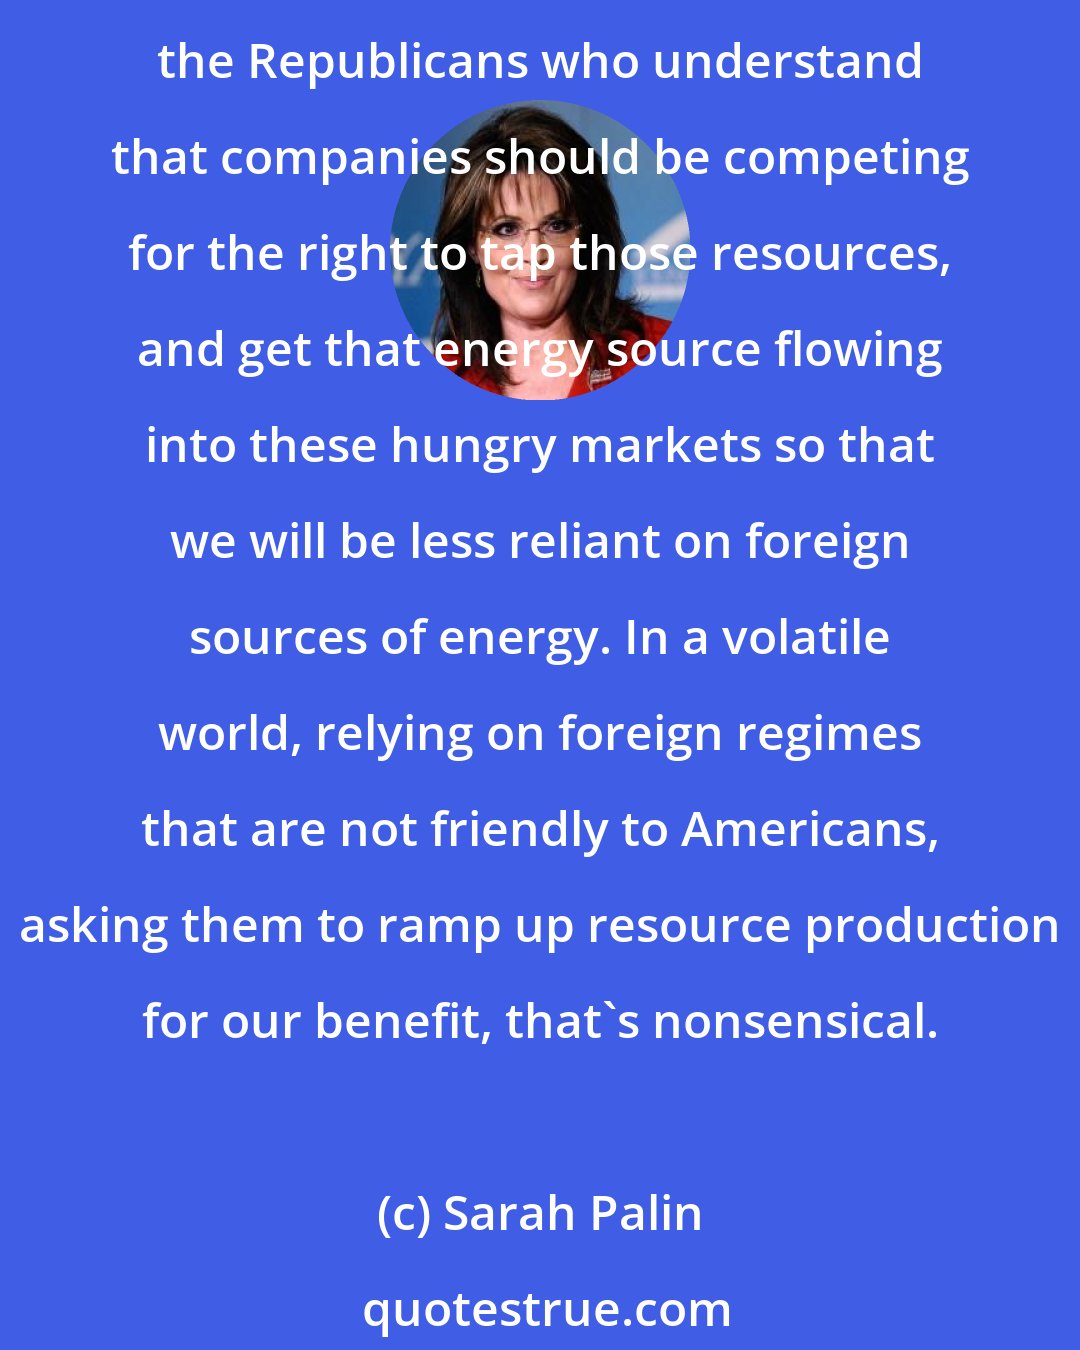 Sarah Palin: Up here in Alaska we're sitting on billions of barrels of oil. We're sitting on hundreds of trillions of cubic feet of natural gas onshore and offshore. And it seems to be only the Republicans who understand that companies should be competing for the right to tap those resources, and get that energy source flowing into these hungry markets so that we will be less reliant on foreign sources of energy. In a volatile world, relying on foreign regimes that are not friendly to Americans, asking them to ramp up resource production for our benefit, that's nonsensical.